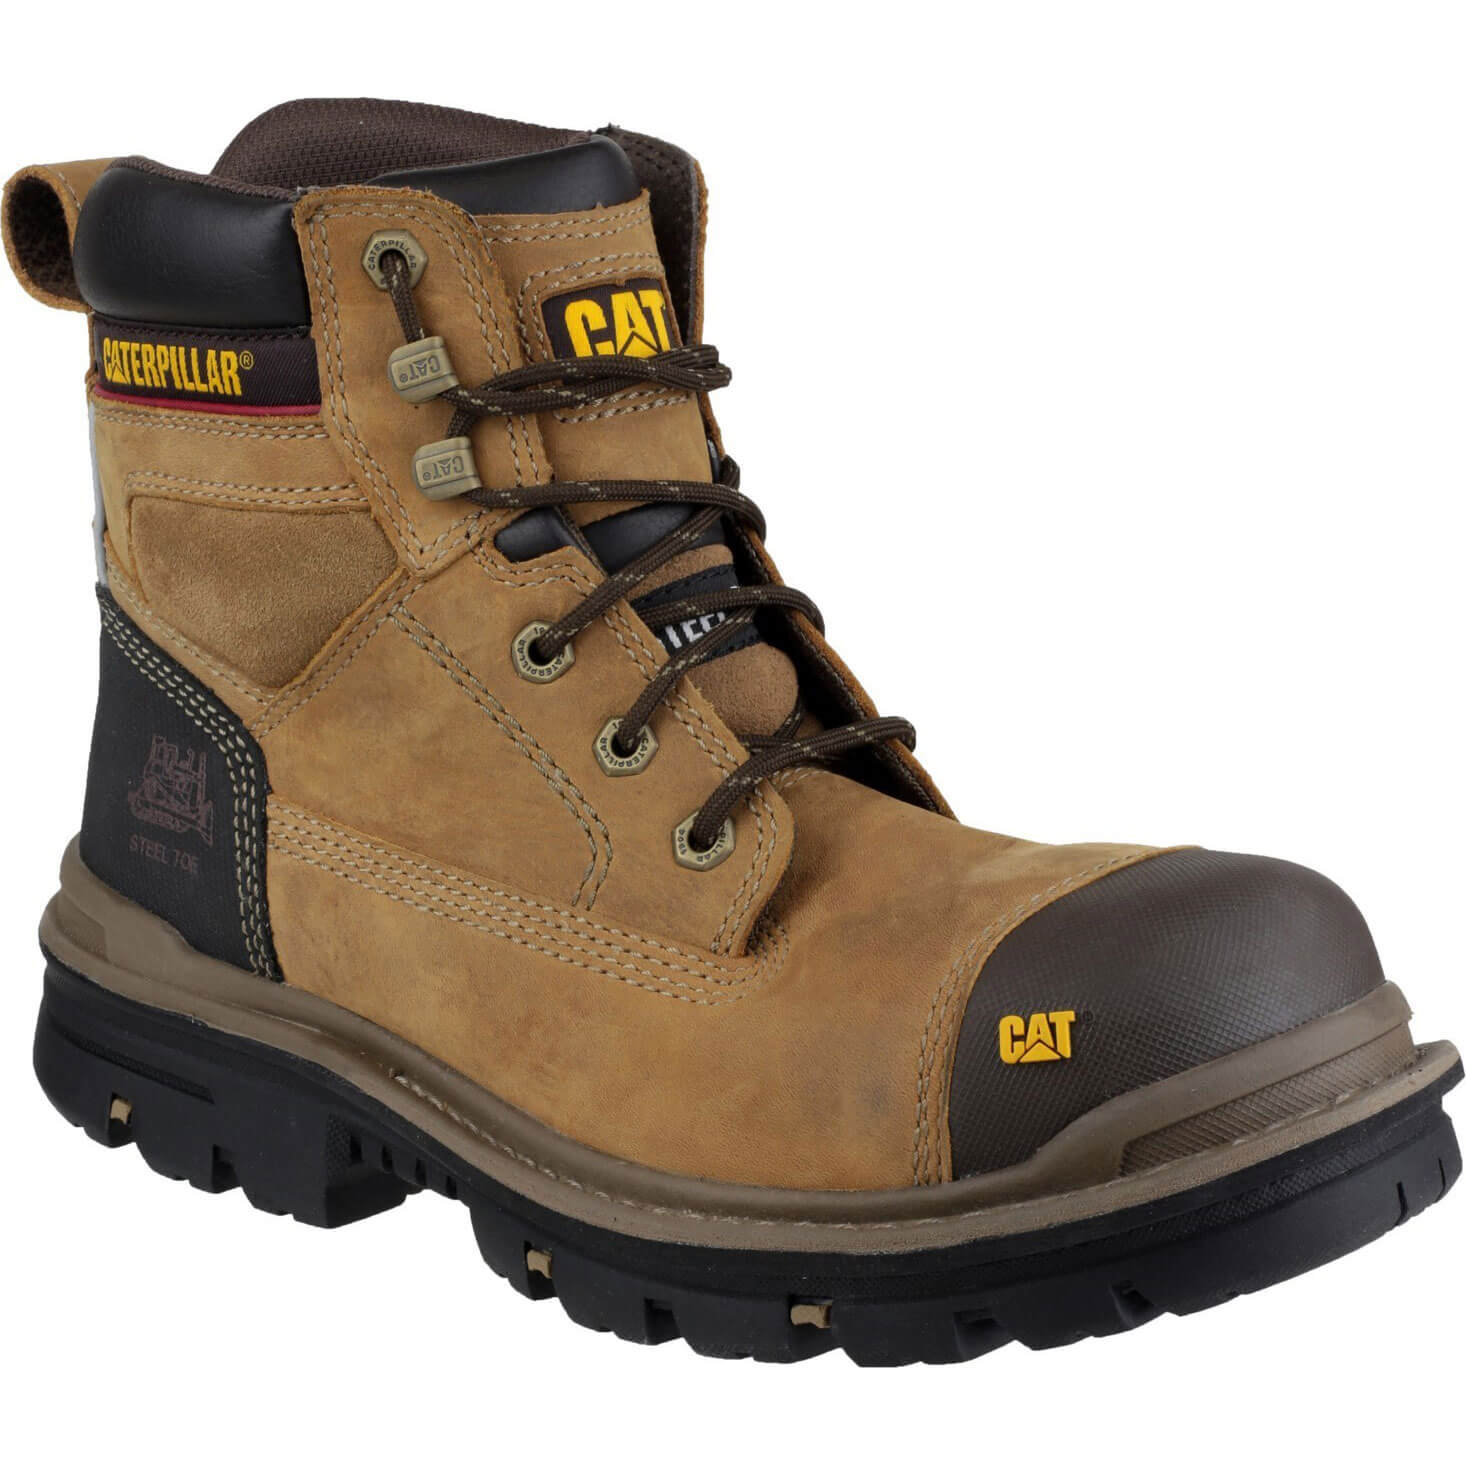 Image of Caterpillar Mens Gravel Safety Boots Beige Size 7